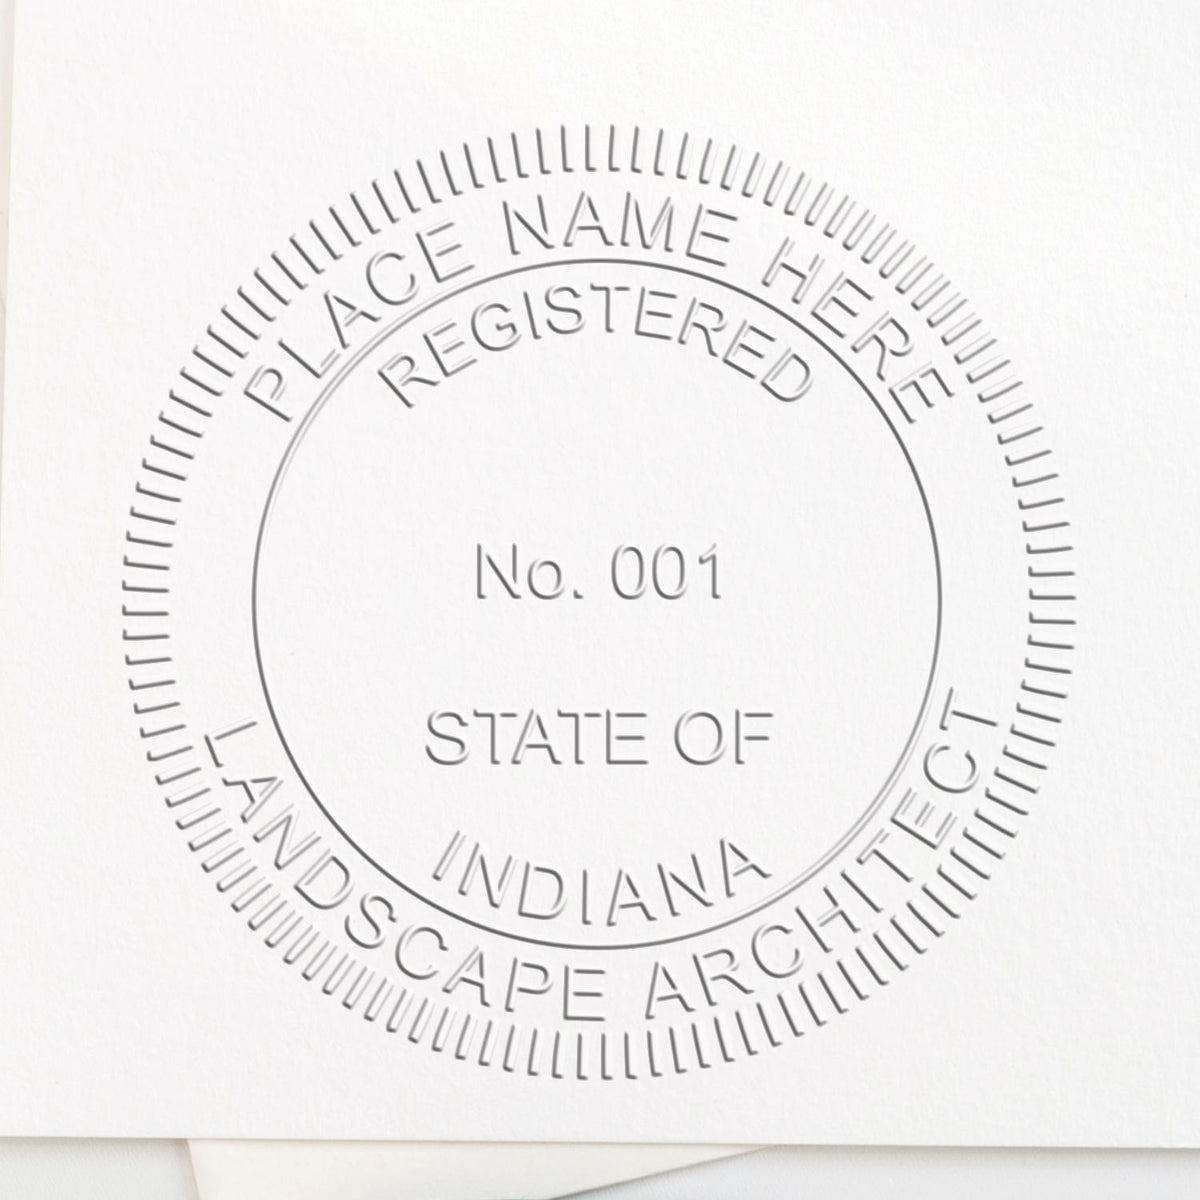 The Gift Indiana Landscape Architect Seal stamp impression comes to life with a crisp, detailed image stamped on paper - showcasing true professional quality.